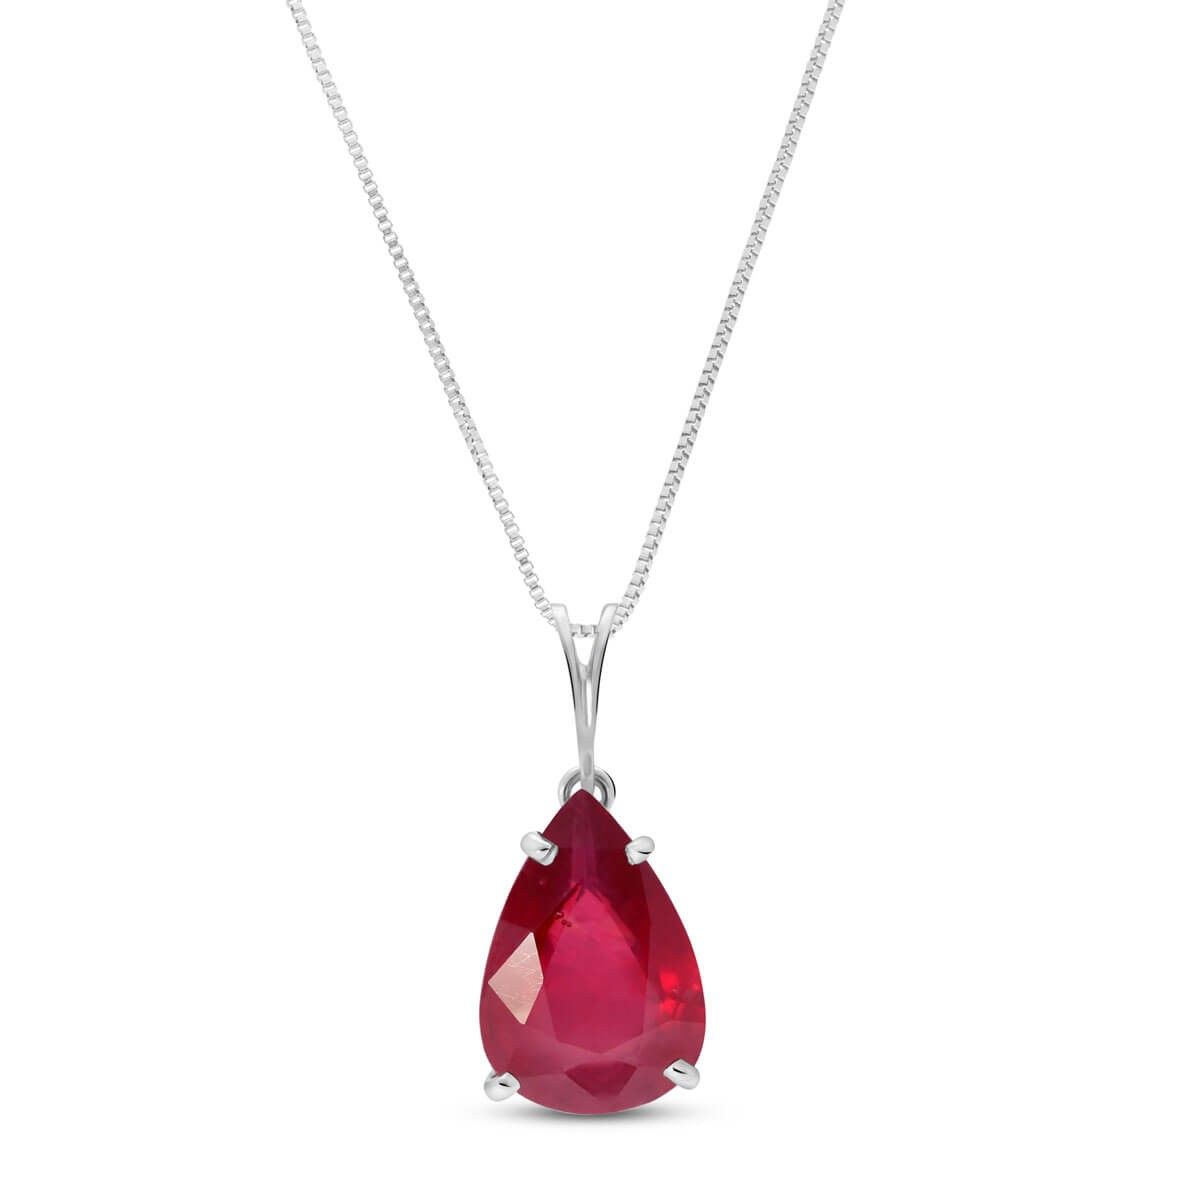 Ruby Pear Drop Pendant Necklace 5 Ct In 9ct White Gold Regarding Latest November Droplet Pendant Necklaces (View 13 of 25)